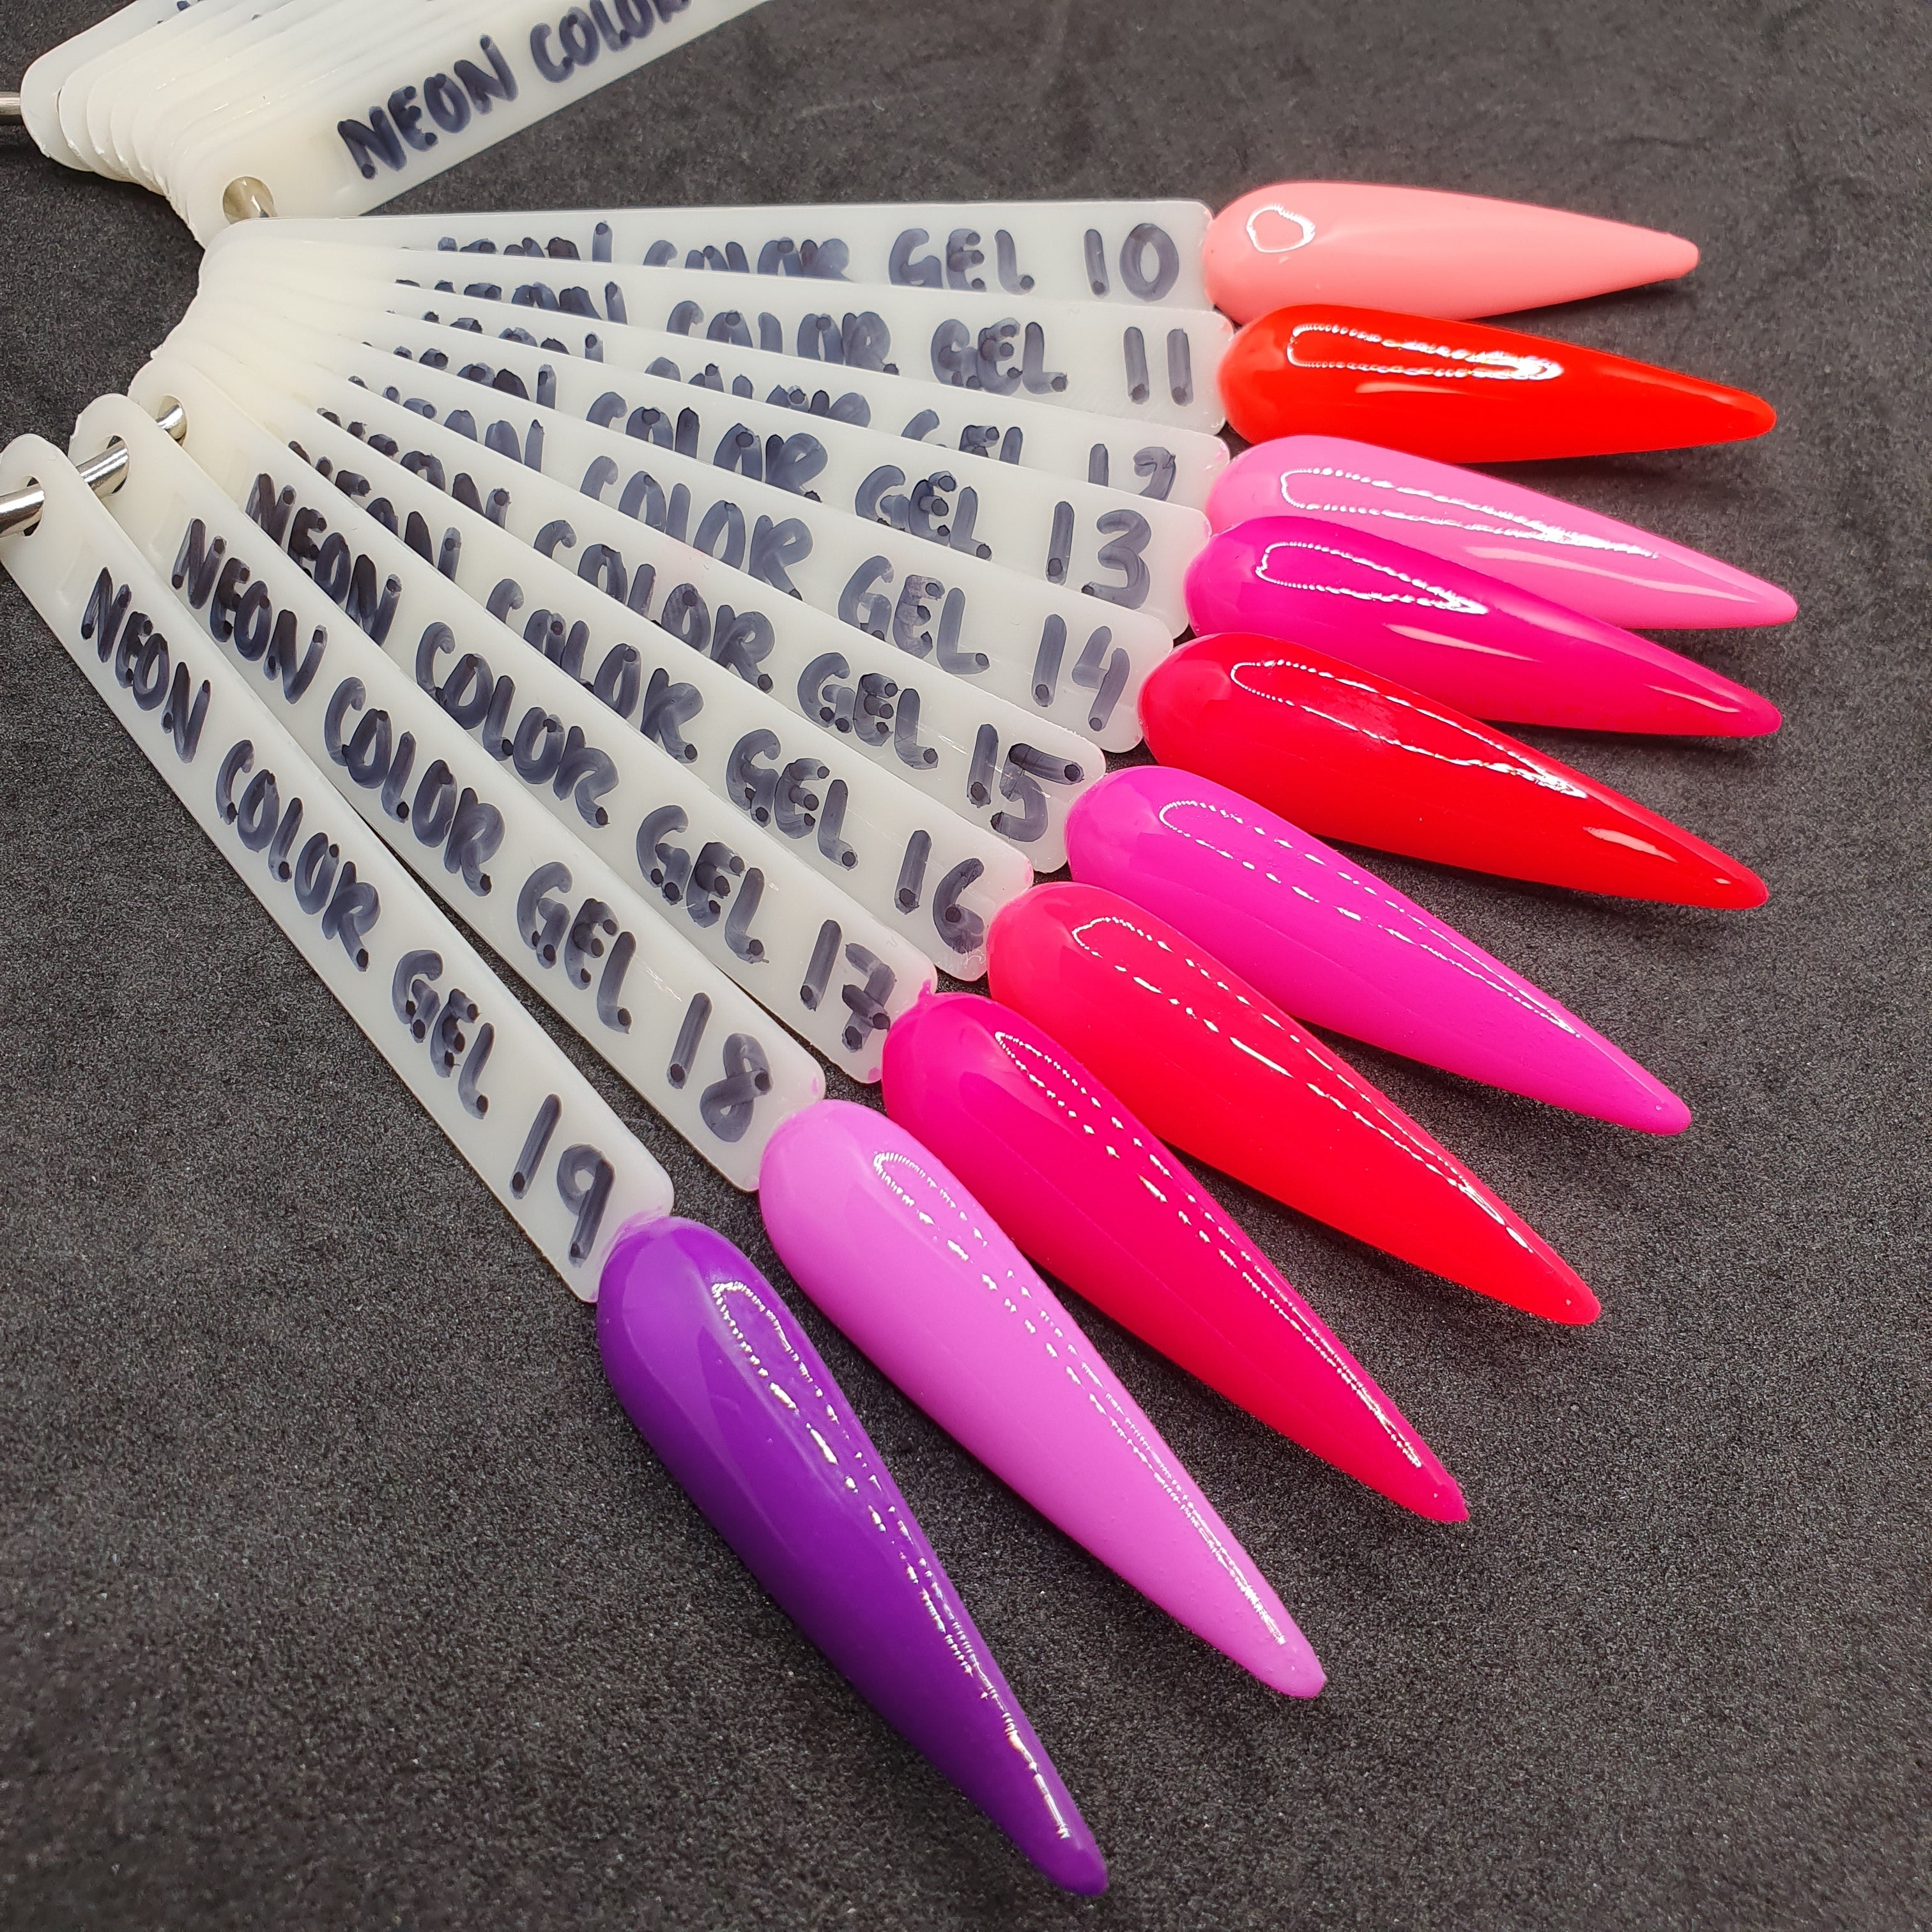 NEW - GND NEON GEL COLOR - 09